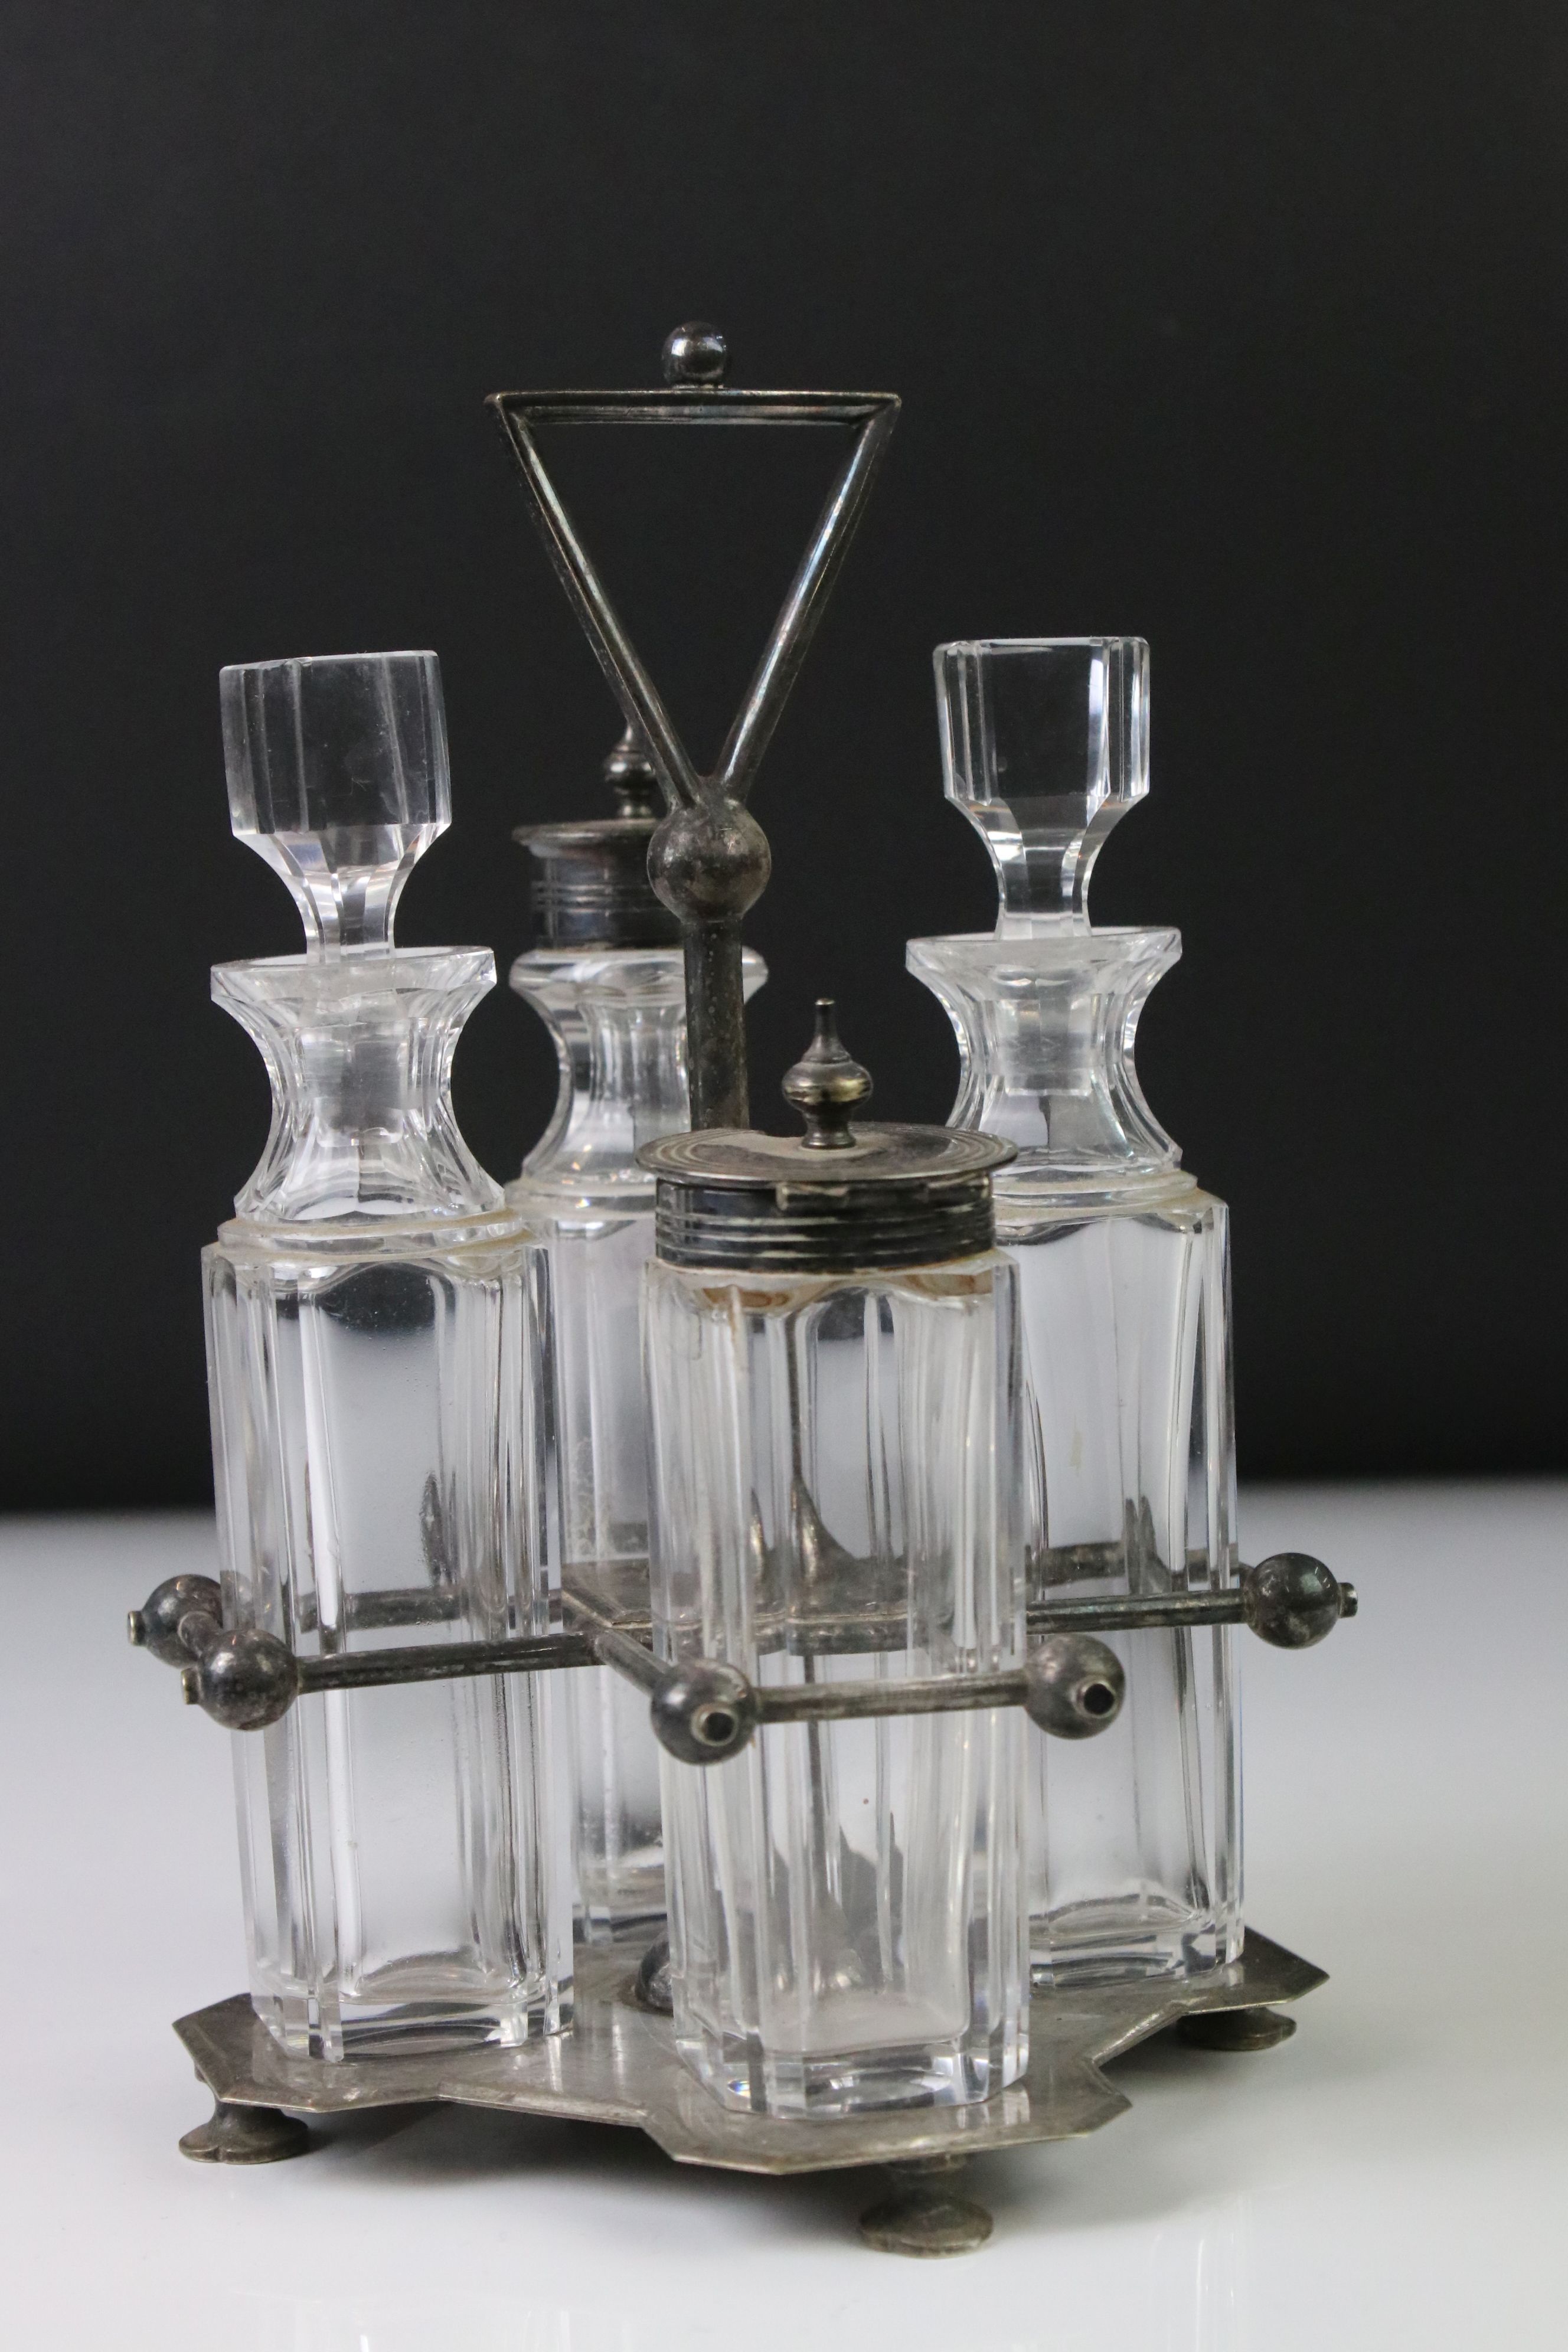 Hukin & Heath silver plate and clear cut crystal glass four piece cruet set on stand, after a design - Image 3 of 7